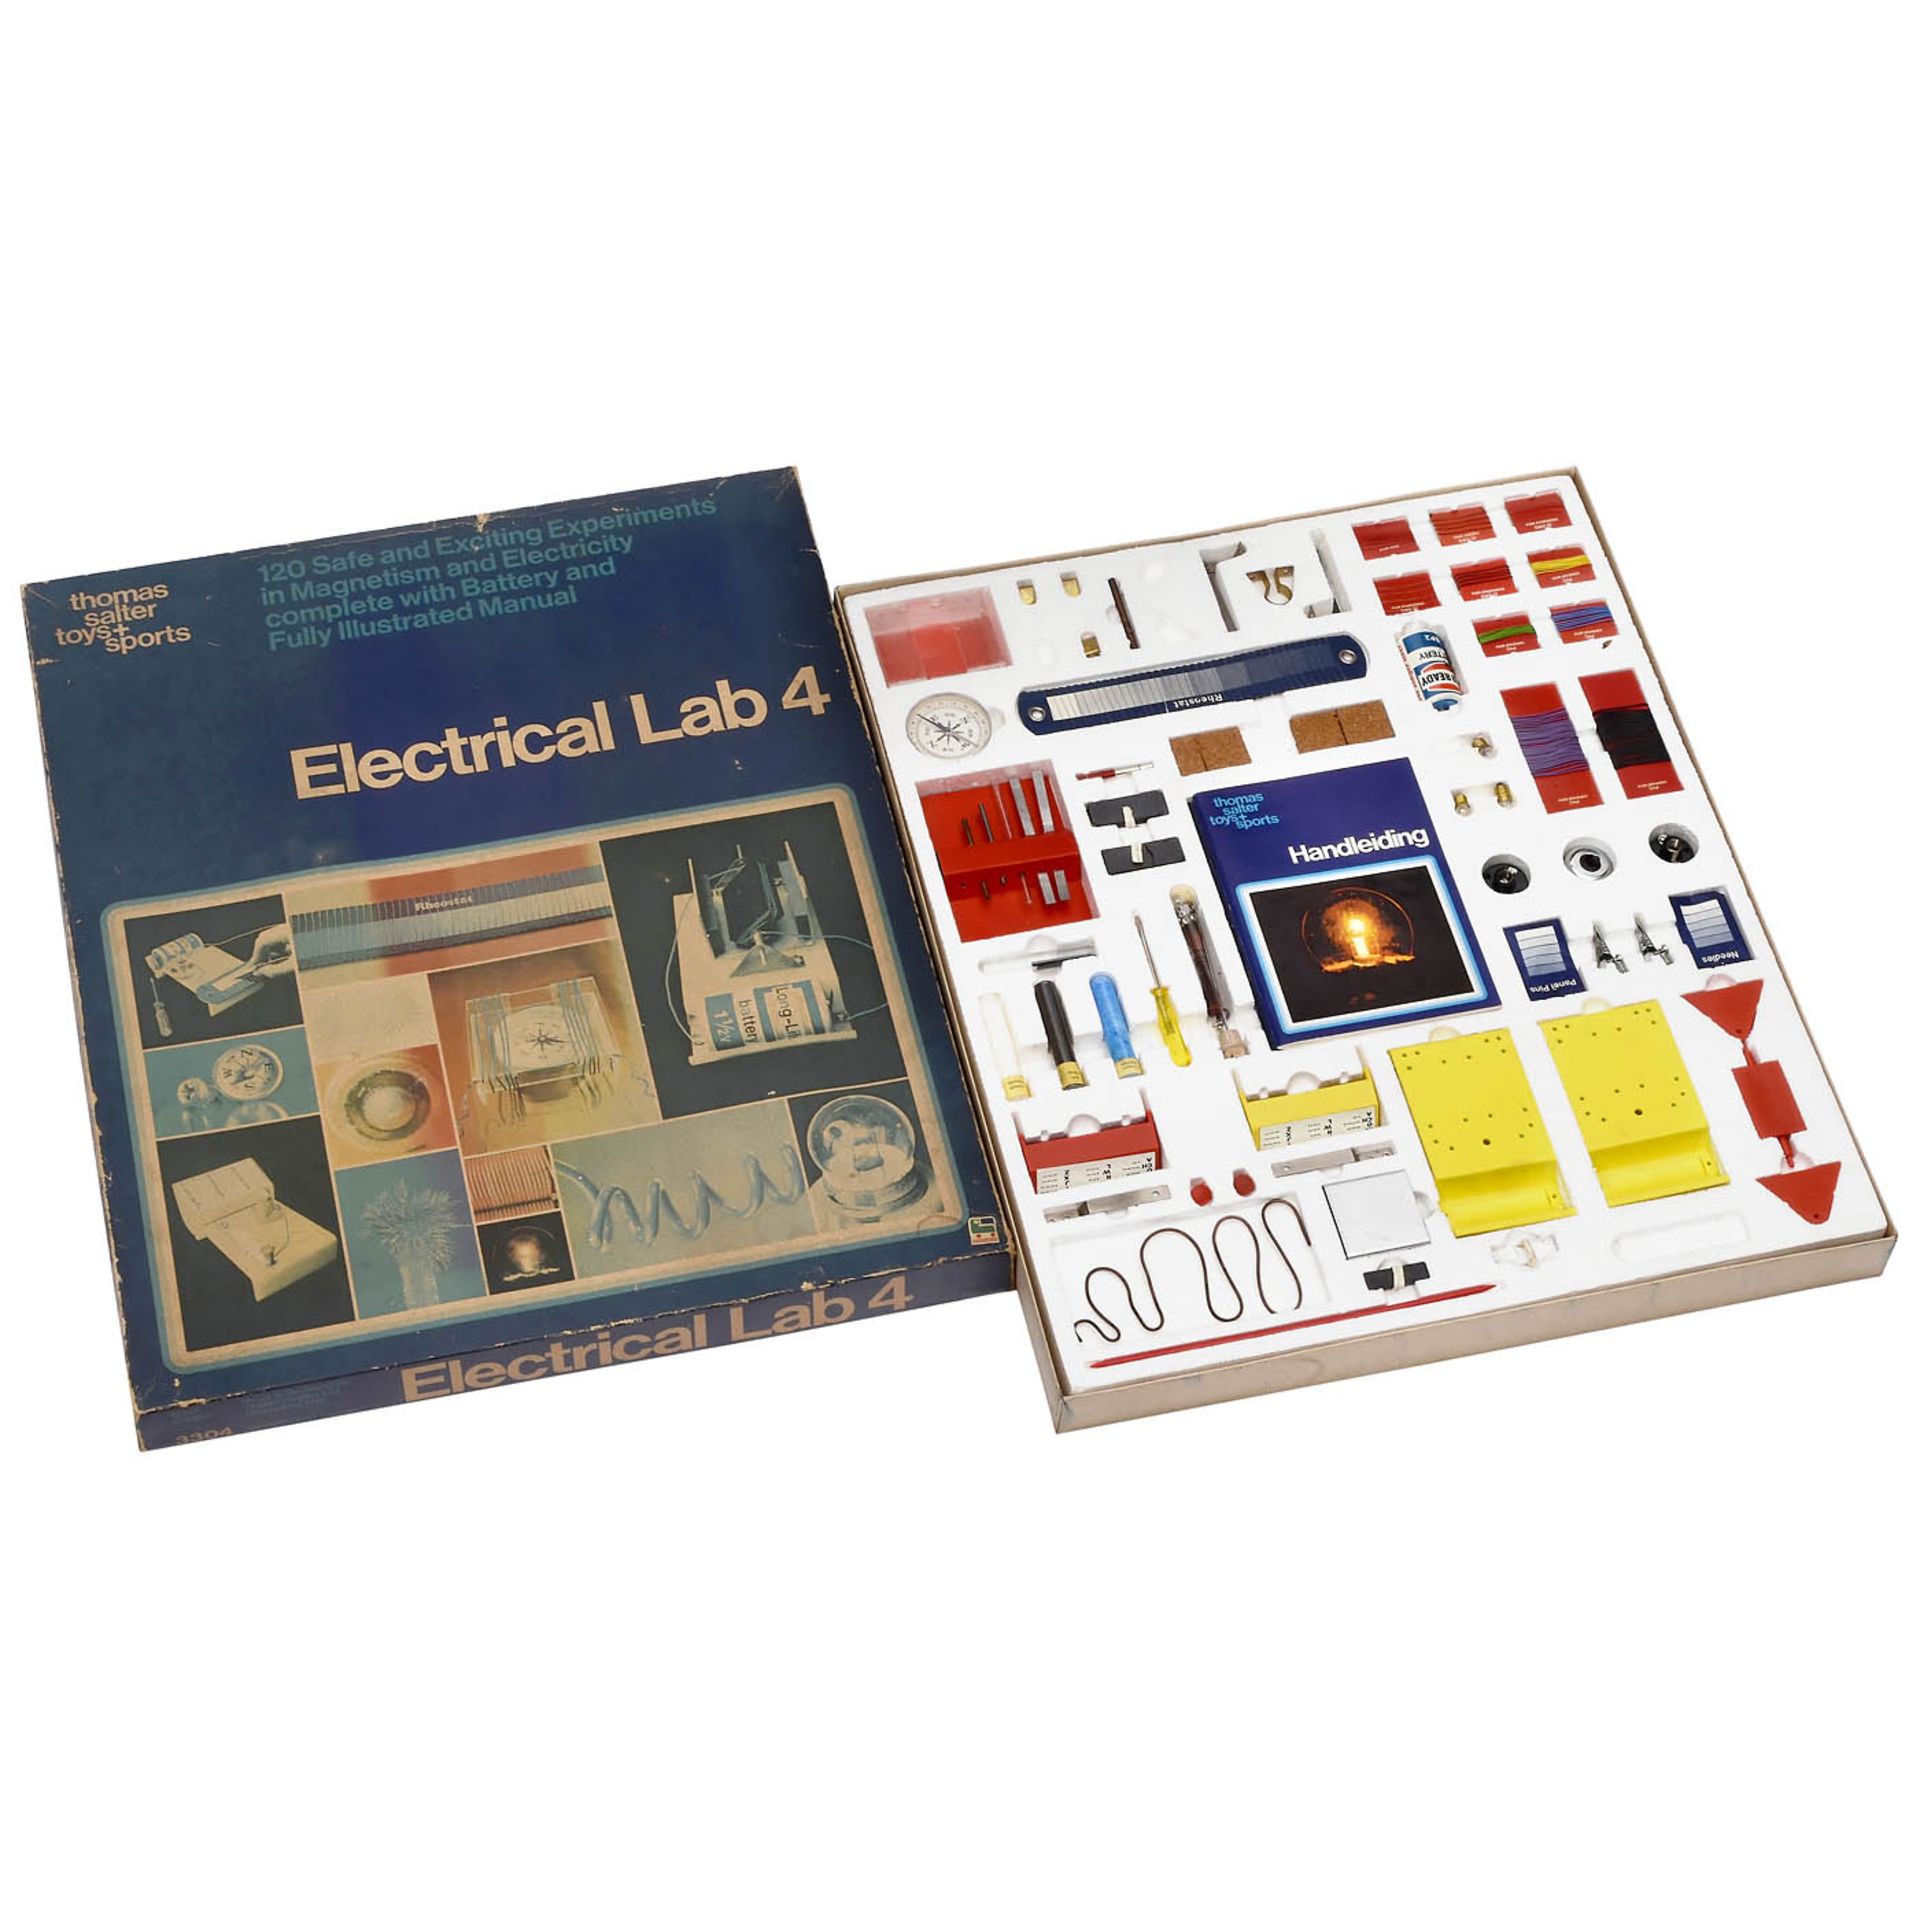 7 Electrotechnical Experiment Kits - Image 2 of 5